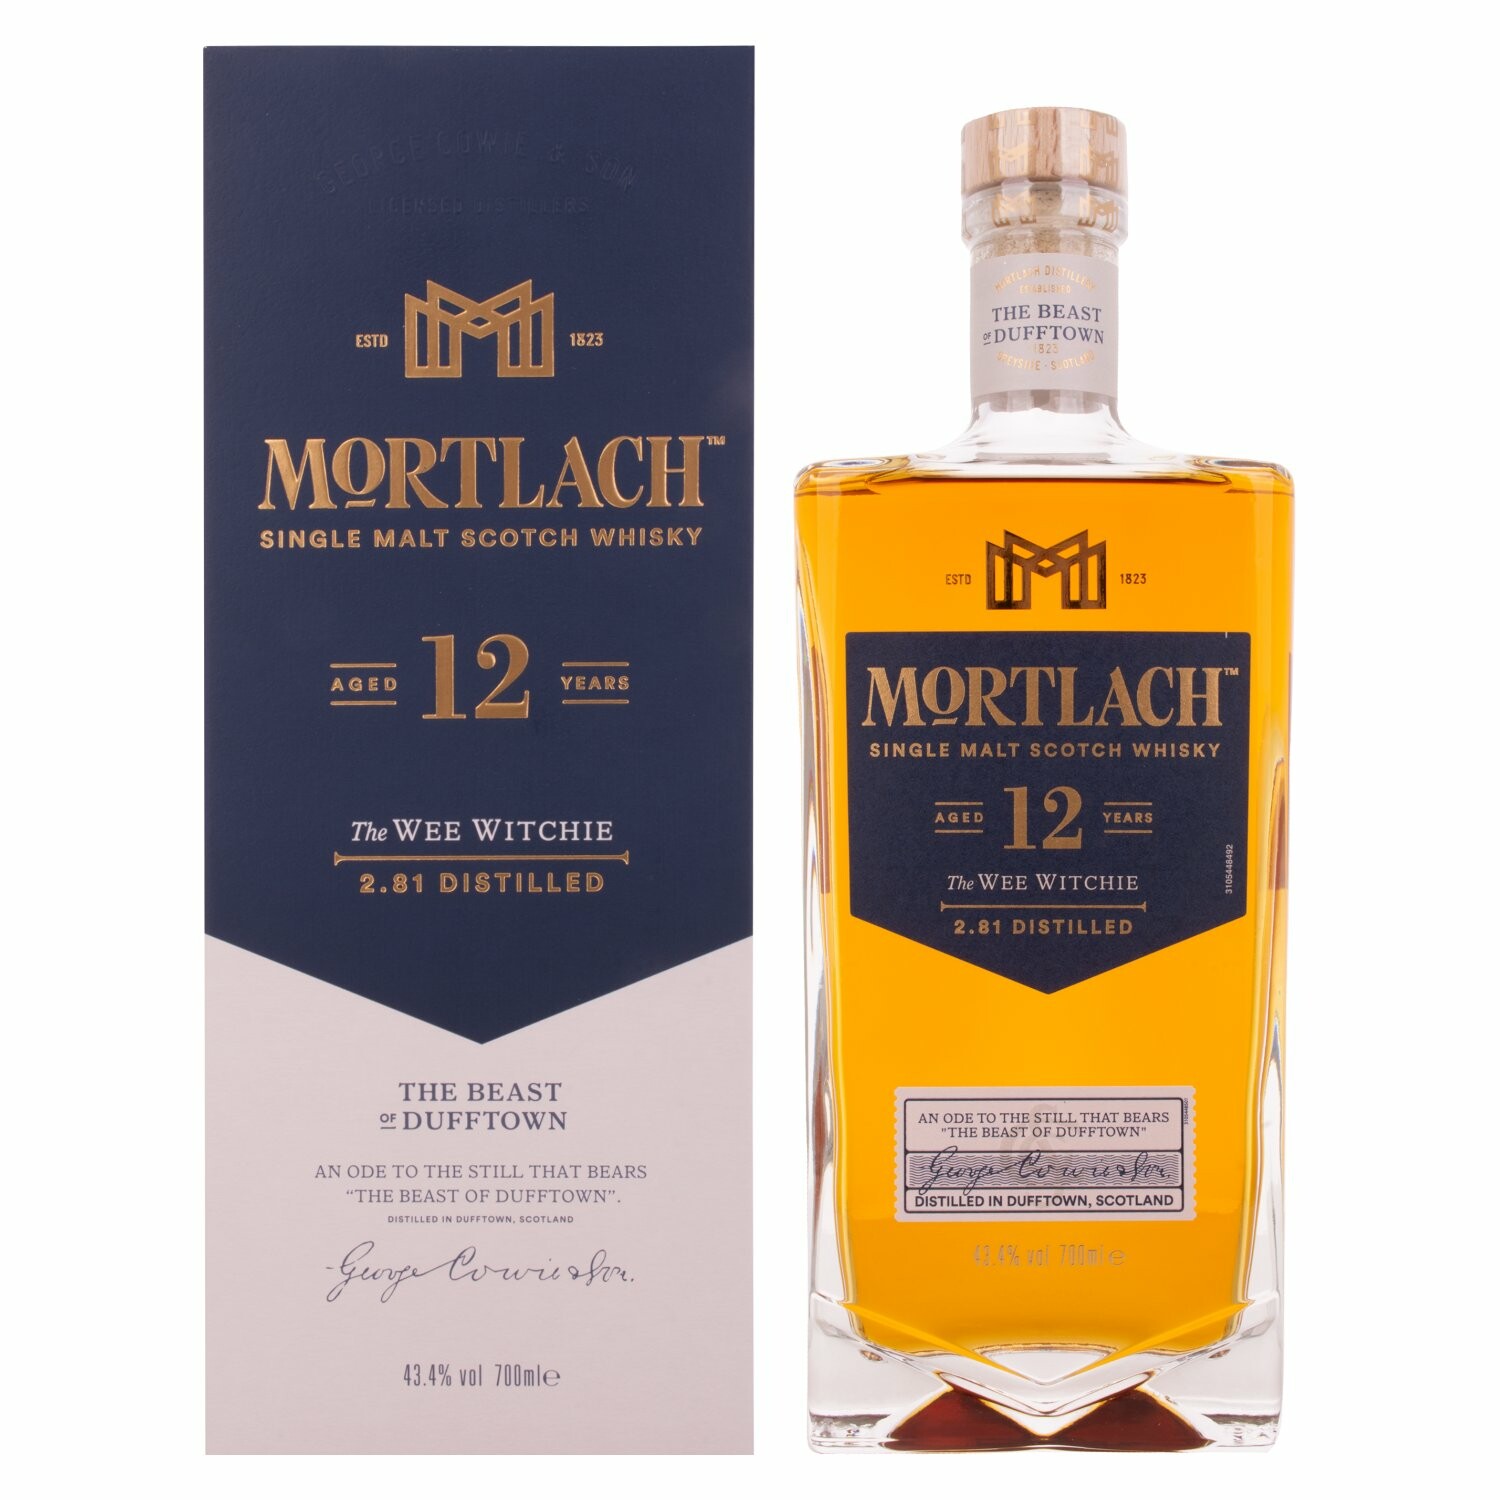 Mortlach 12 Years Old The WEE WITCHIE Single Malt 43,4% Vol. 0,7l in Giftbox